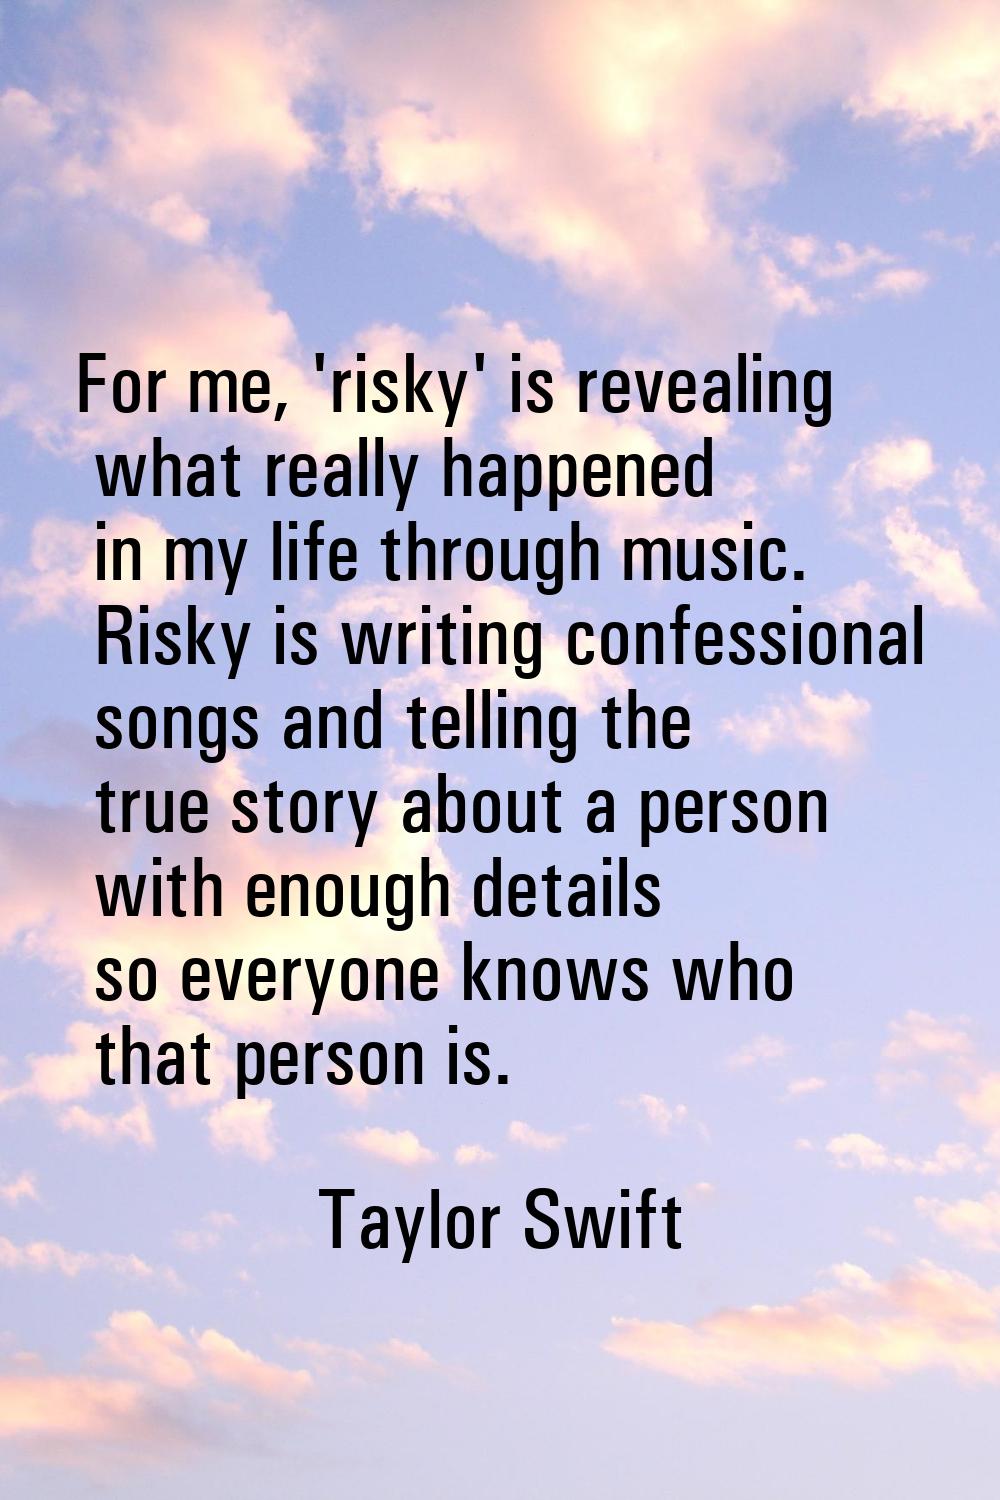 For me, 'risky' is revealing what really happened in my life through music. Risky is writing confes